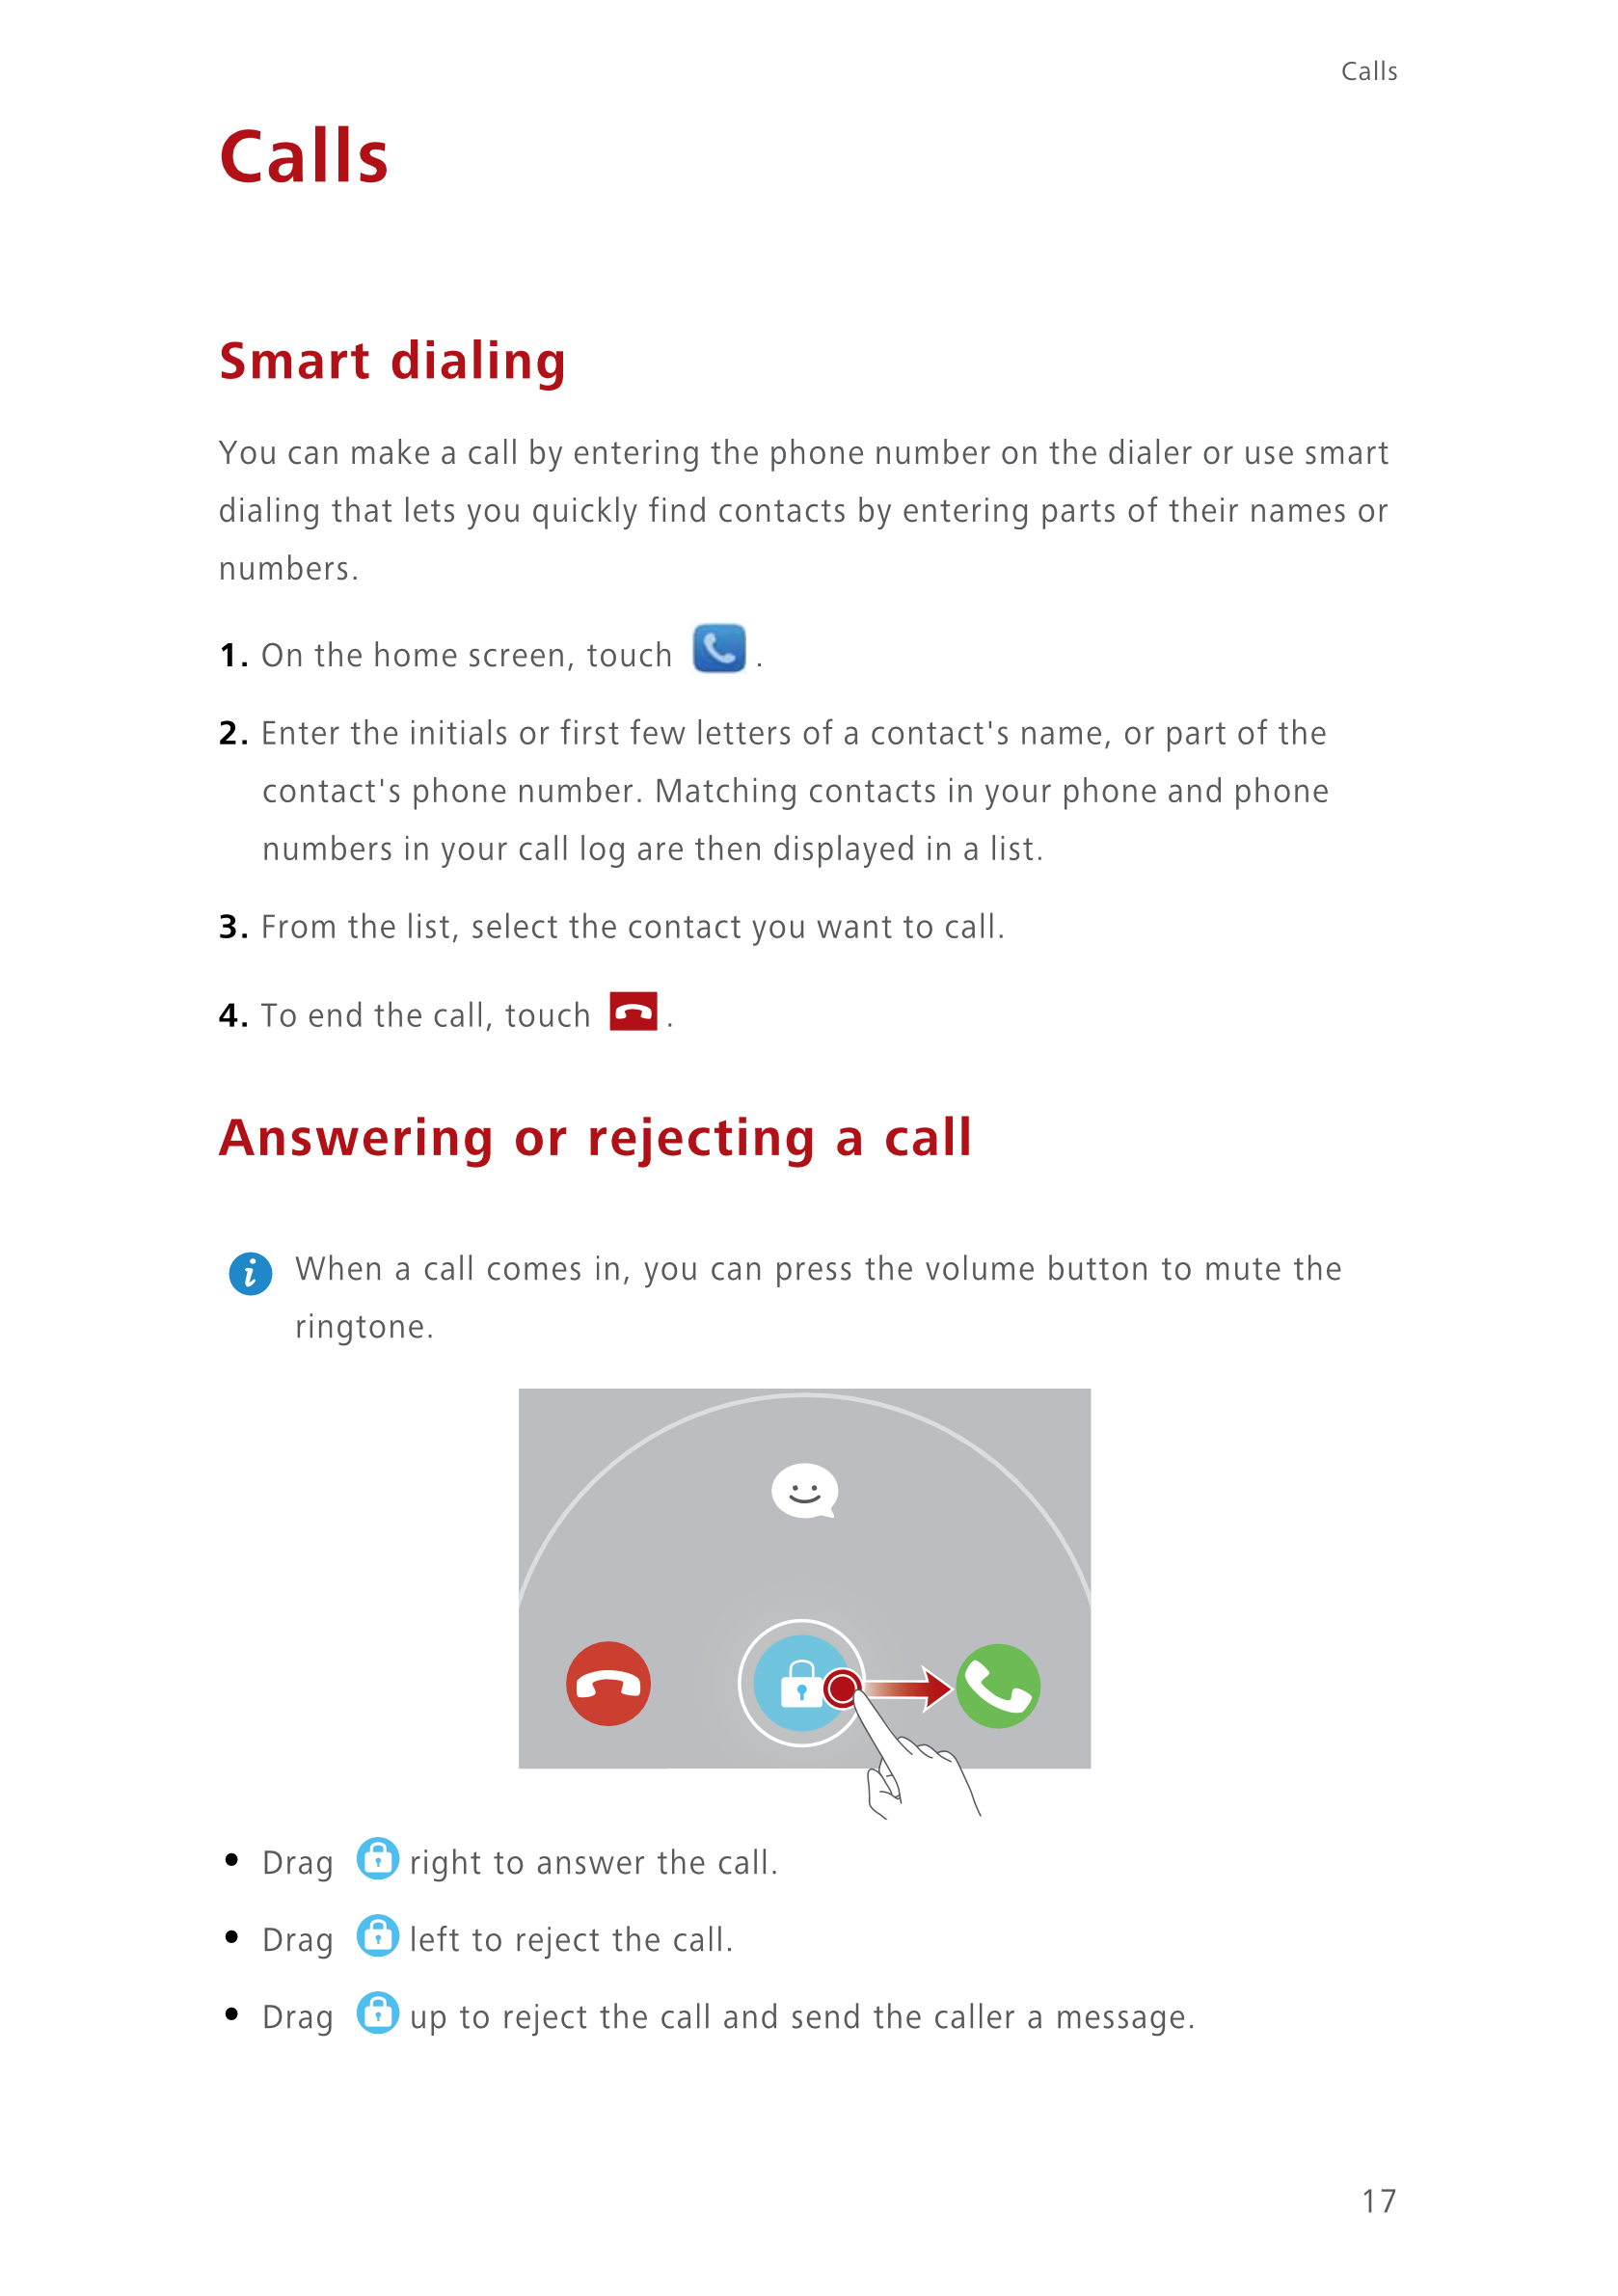 Calls
Calls
Smart dialing
You can make a call by entering the phone number on the dialer or use smart 
dialing that lets you qui